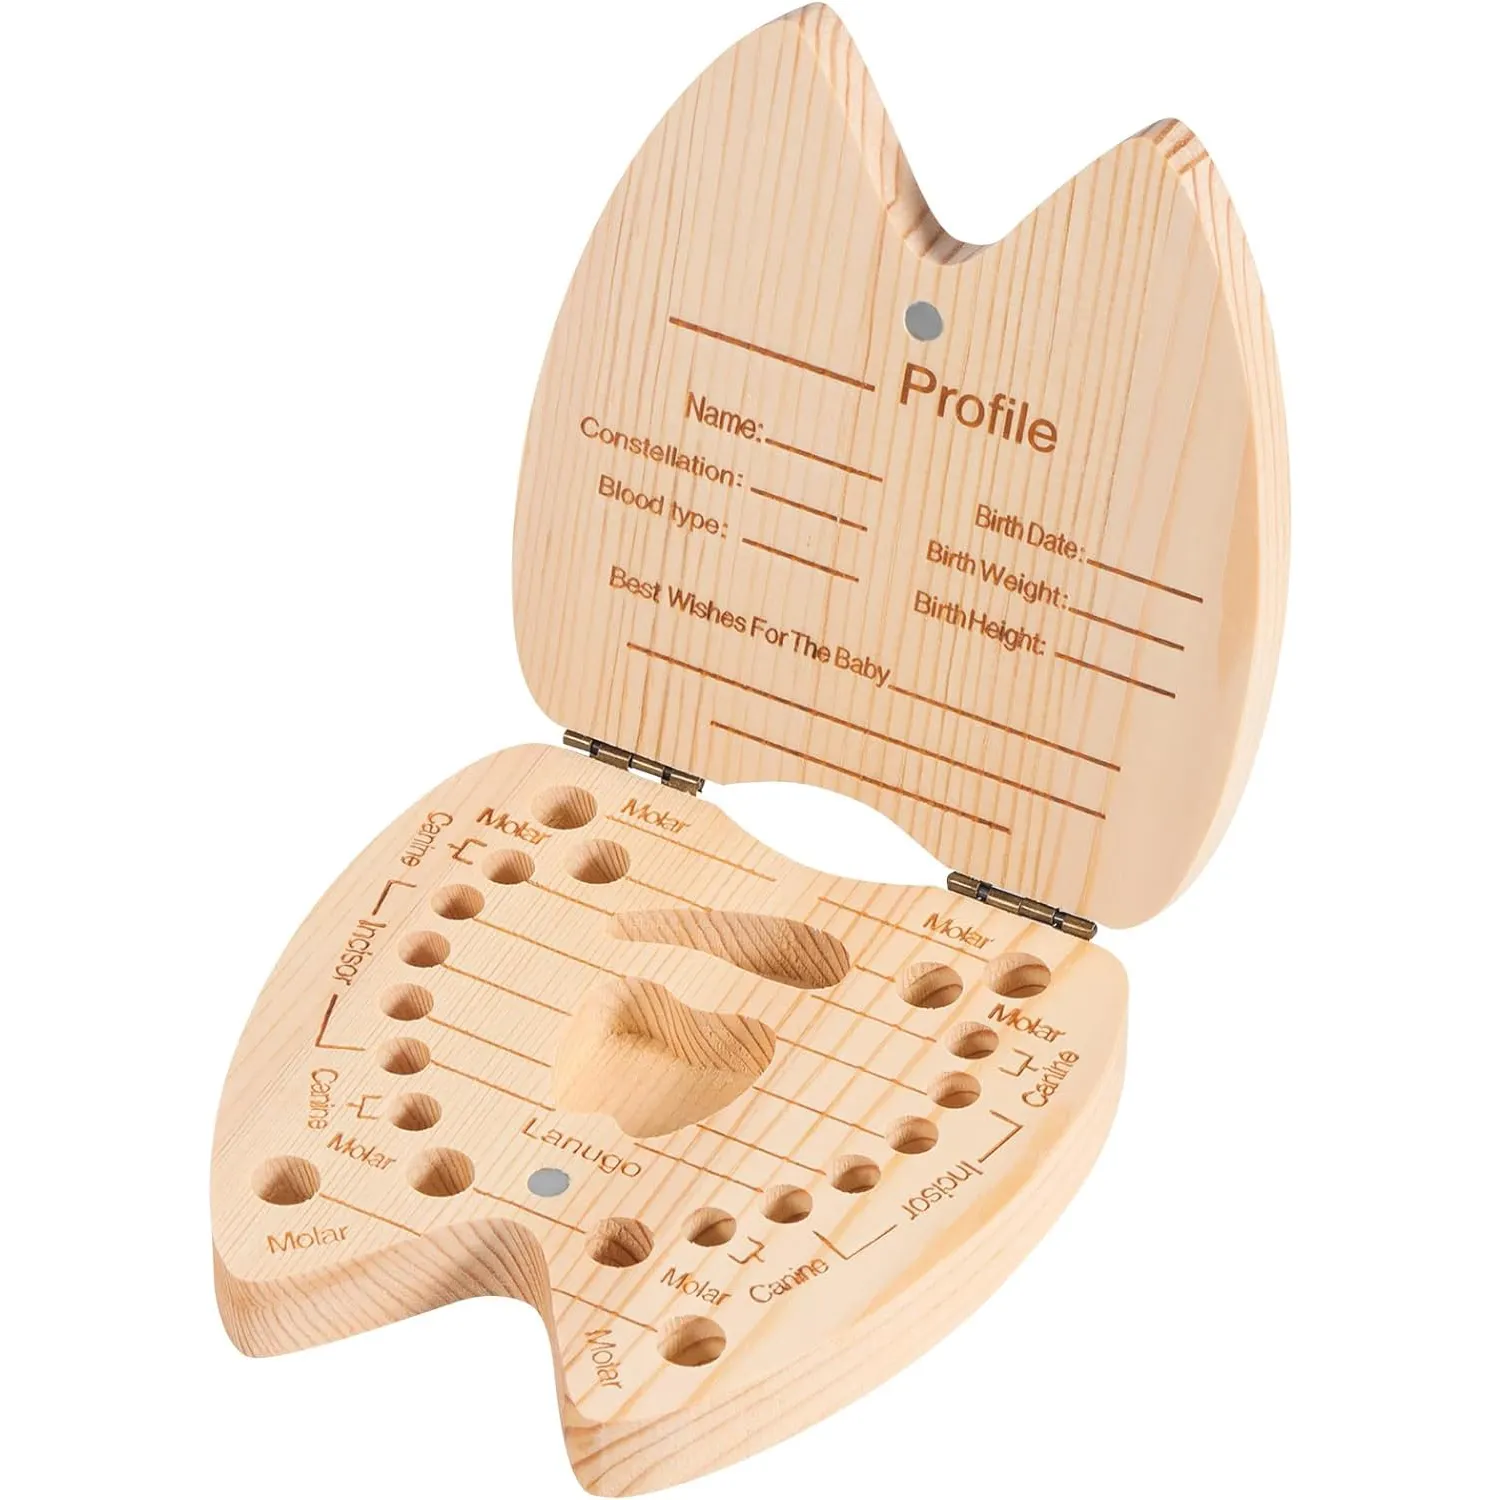 Wooden Tooth Fairy Box for Girls Baby Tooth Box Umbilical Cord souvenir box can store 20 lost baby tooth hair and record